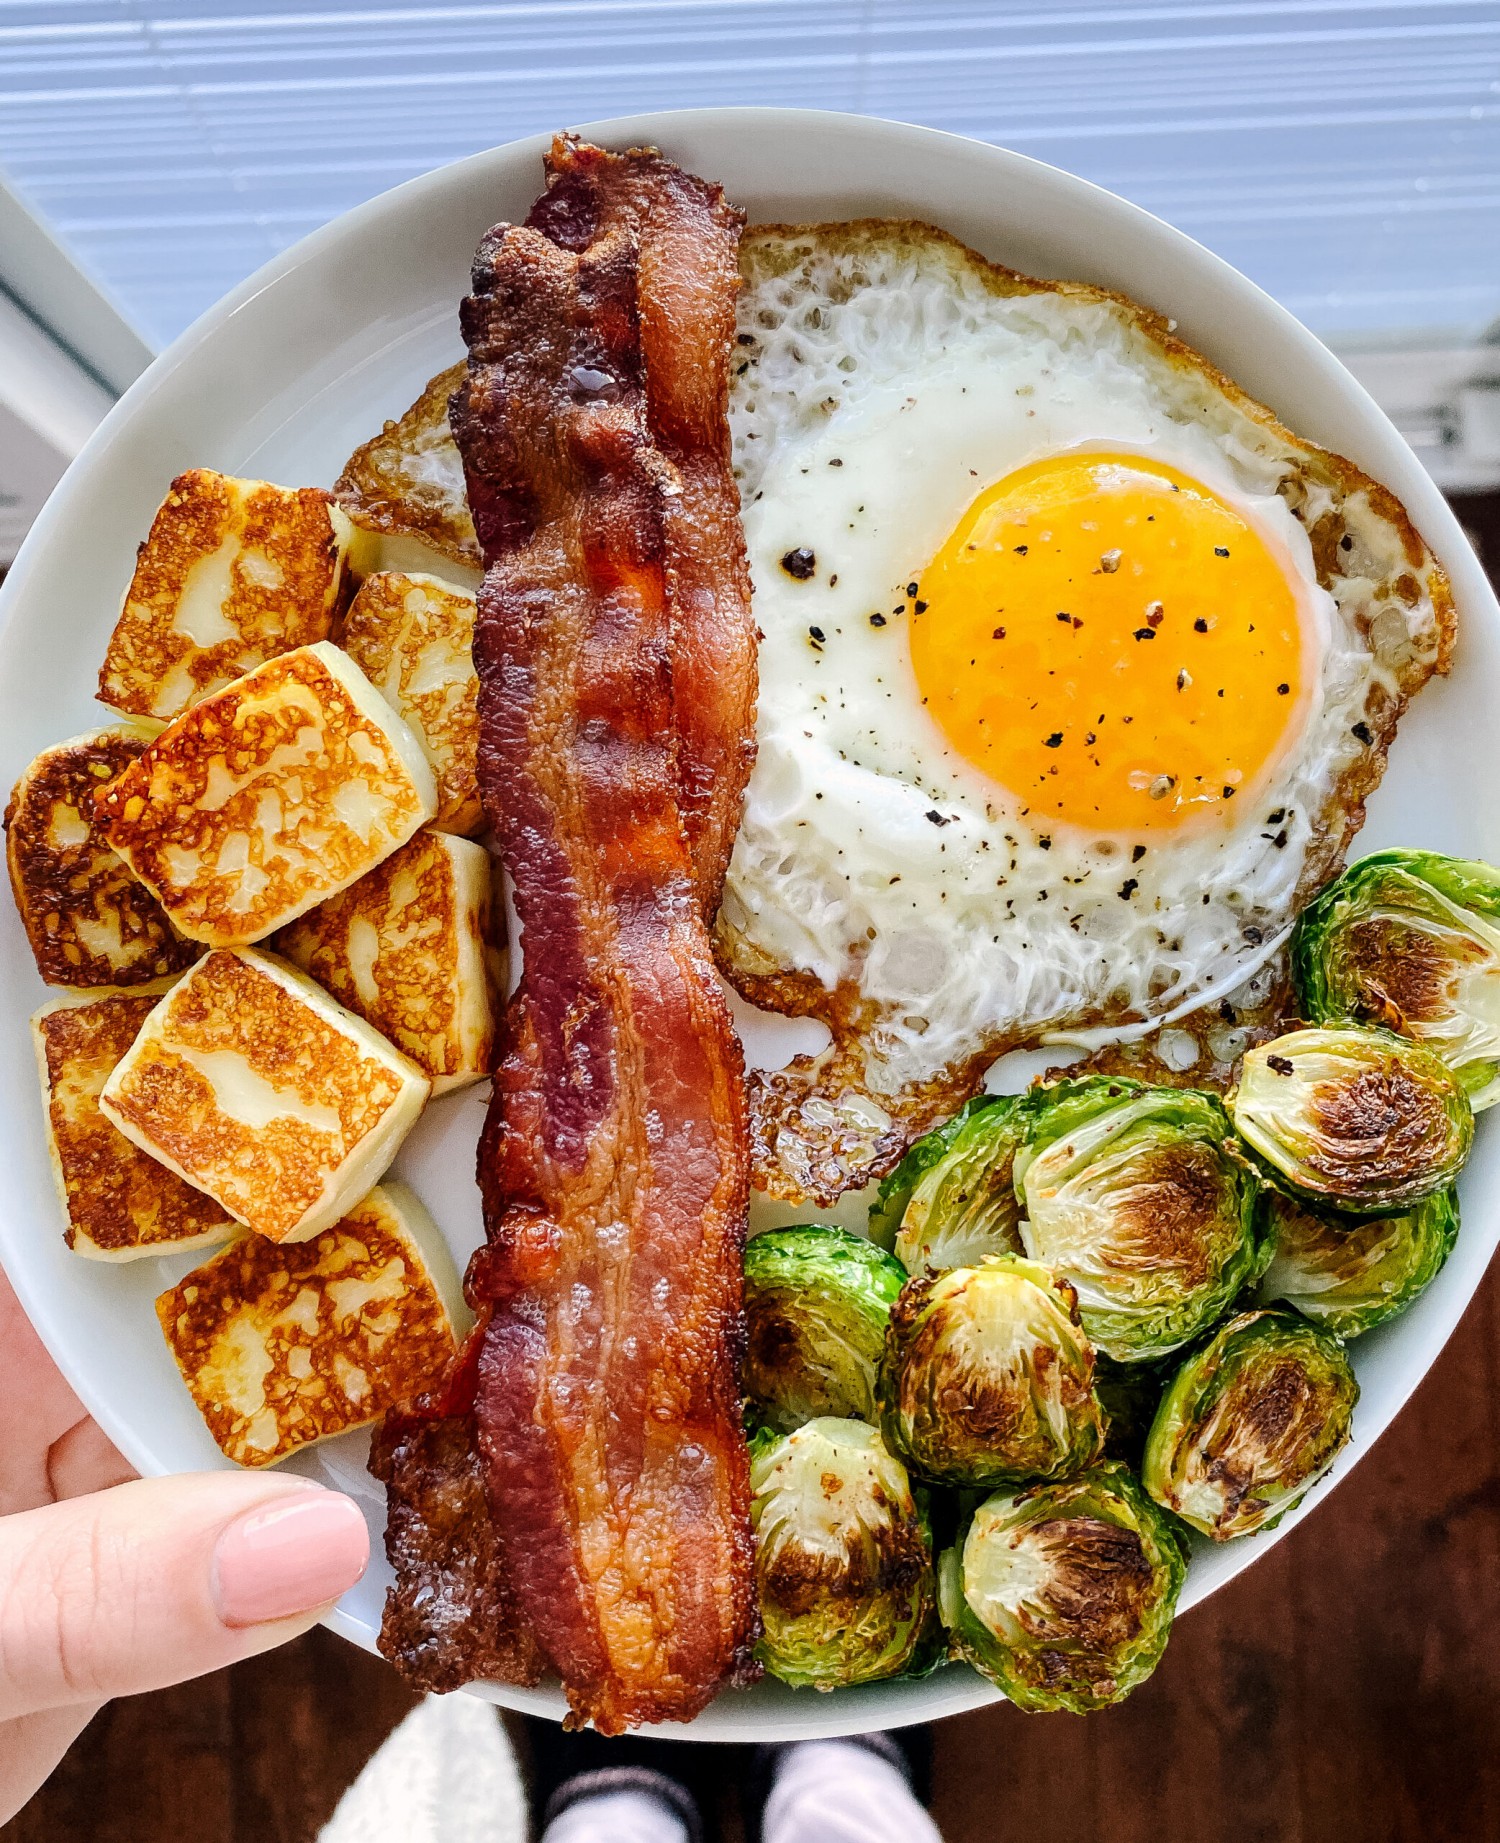 Above view of a breakfast plate with eggs, bacon and roasted brussels sprouts